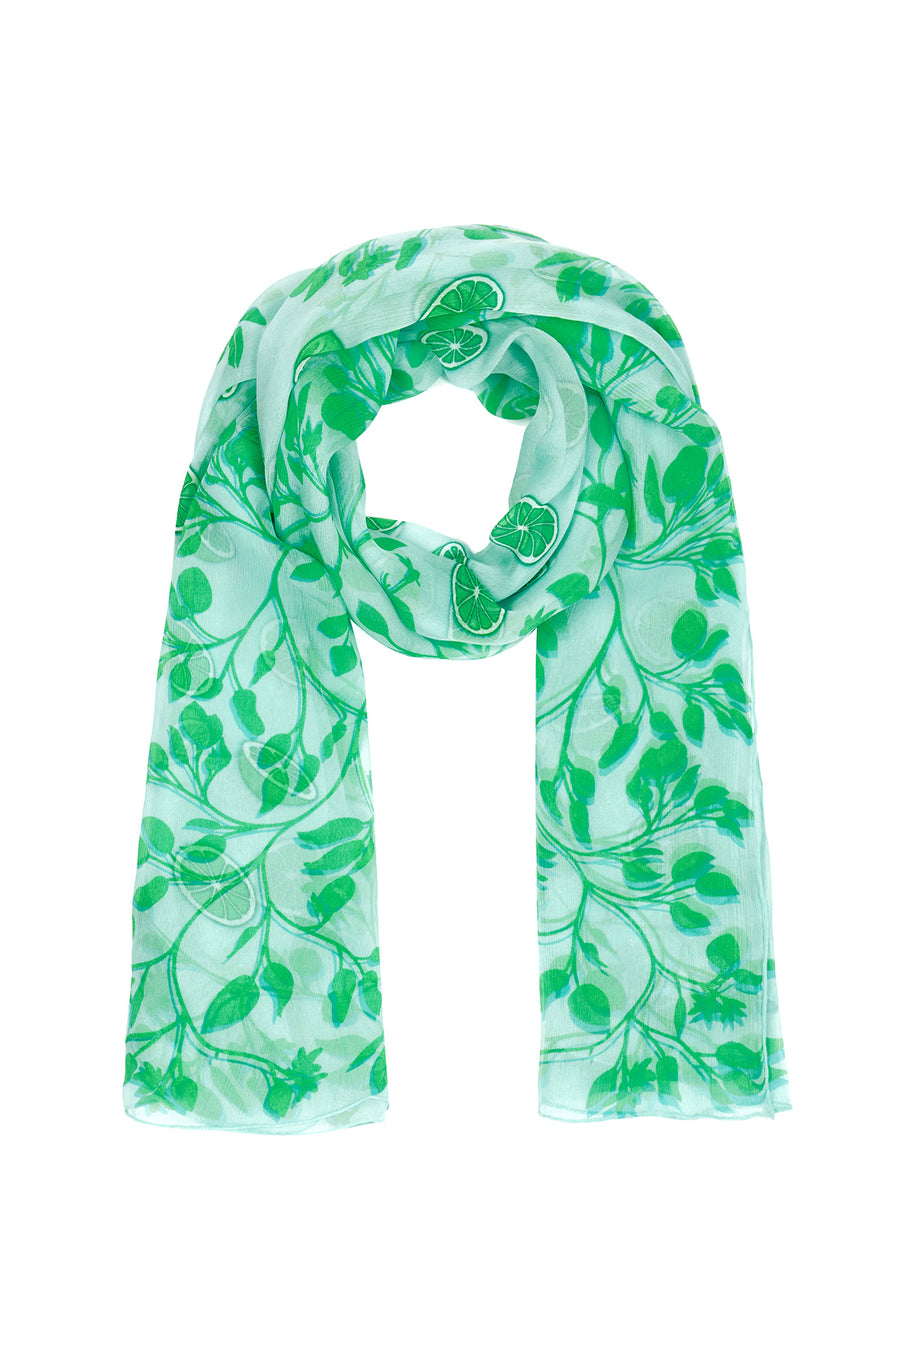 A Lotty B Lime Tree green chiffon sarong makes a versatile addition to your wardrobe or an ideal gift